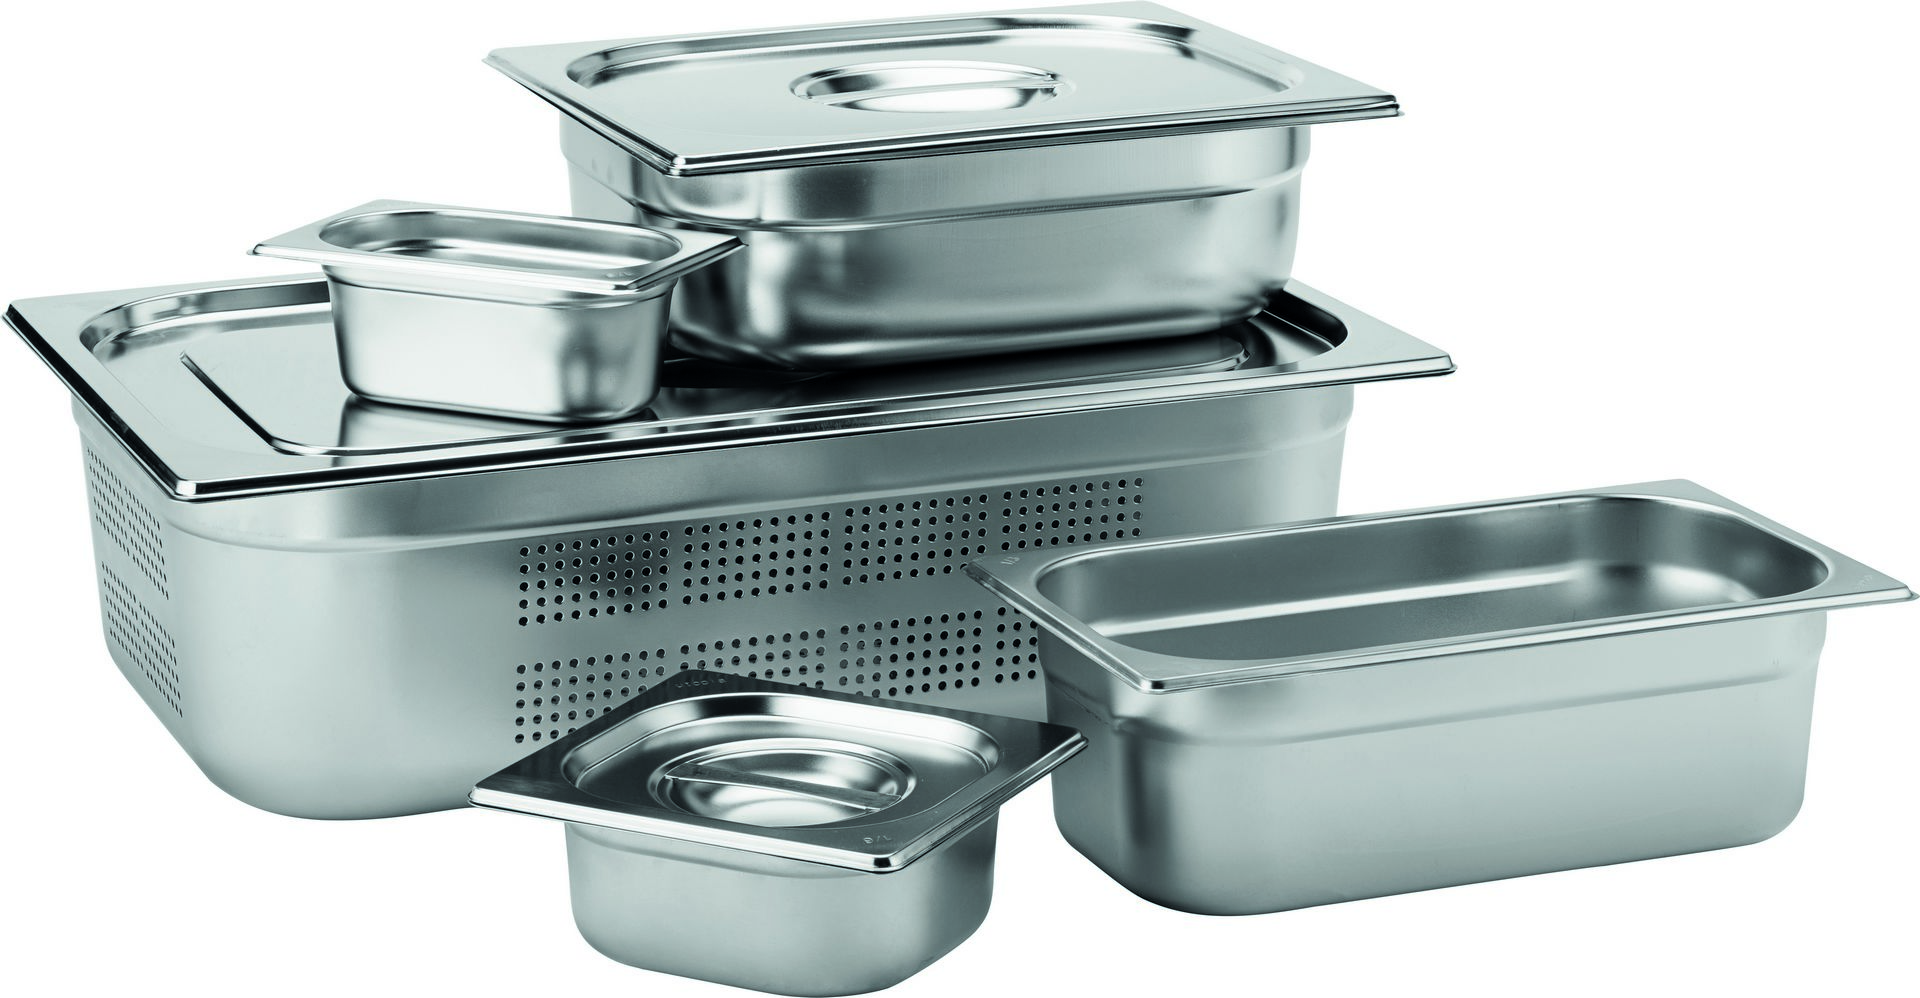 Stainless Steel GN  1/3 Pan 20cm Deep - F70014-000000-B01006 (Pack of 6)